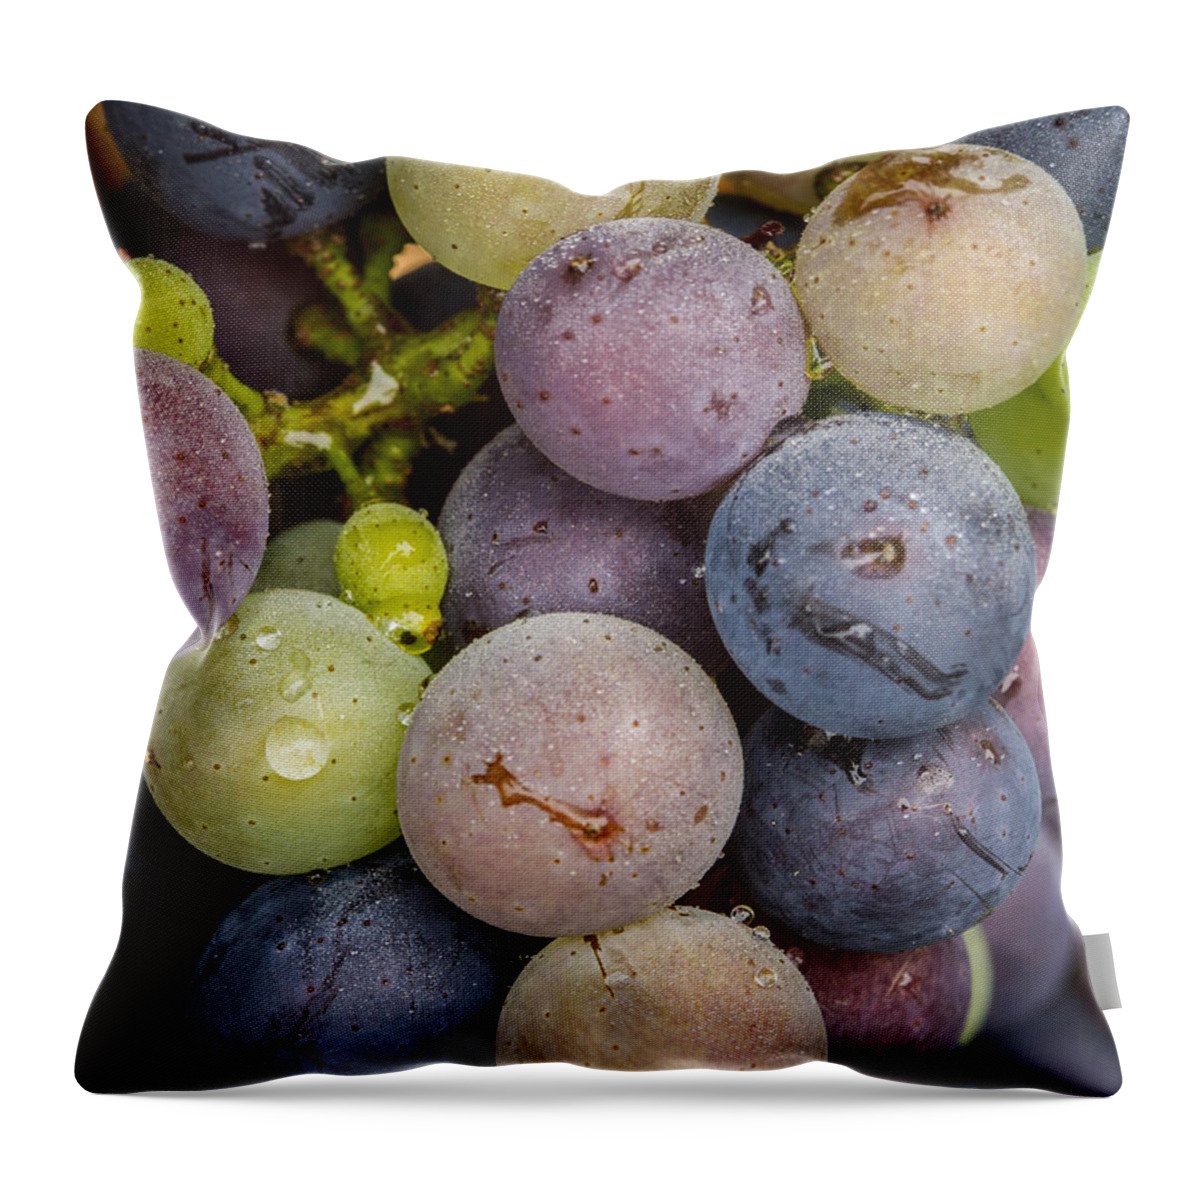 Grape Throw Pillow featuring the photograph Variation by Jean Noren